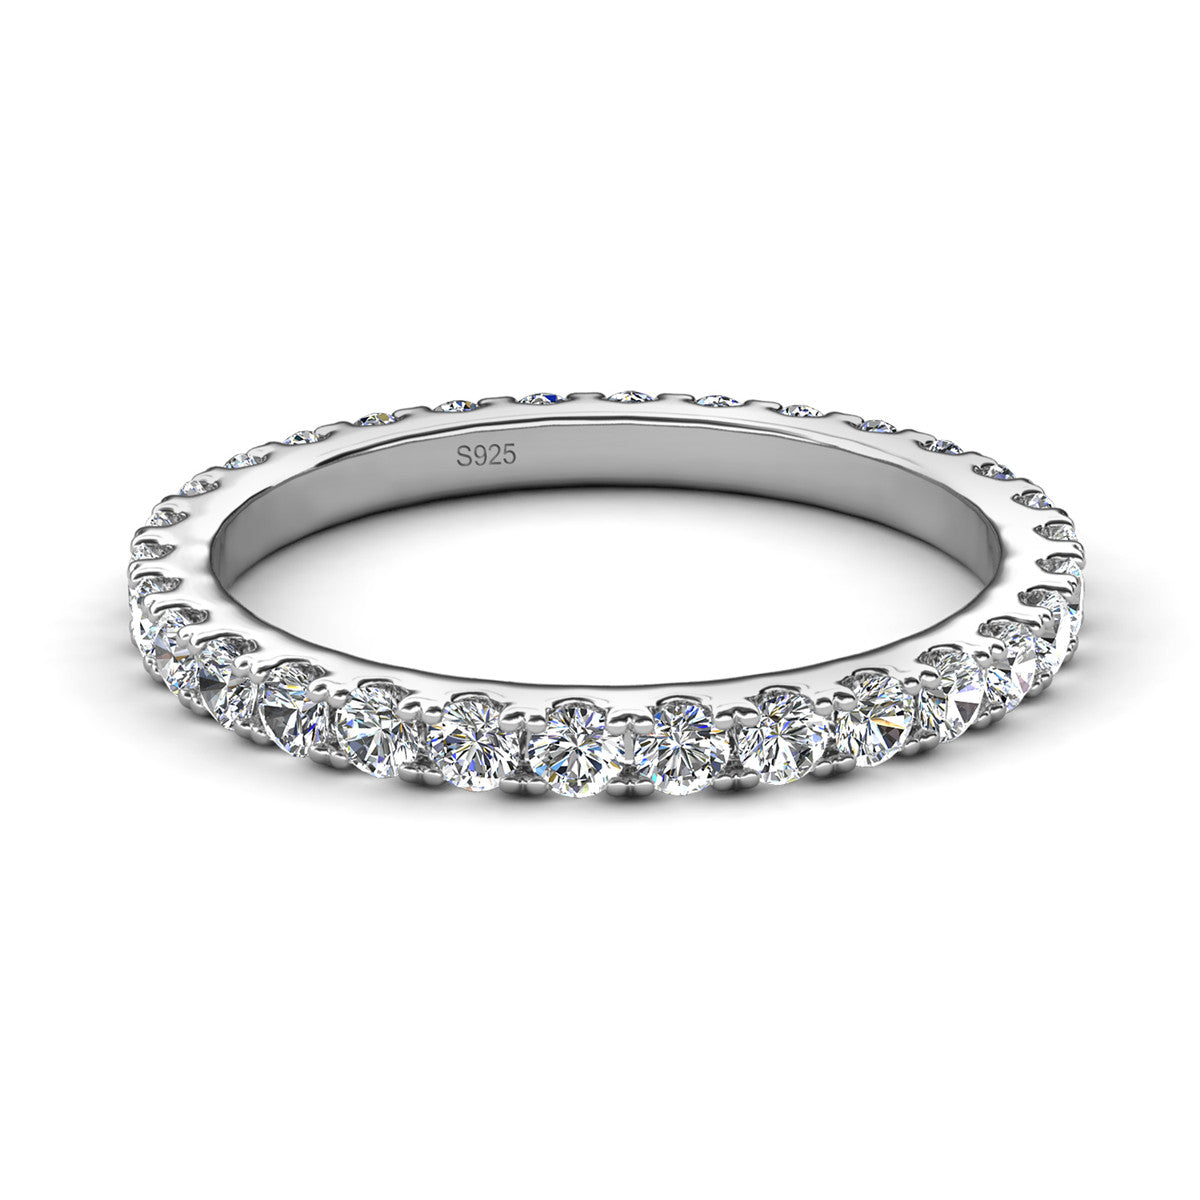 Moissanite by Cate & Chloe Sadie Sterling Silver Ring with Moissanite and 5A Cubic Zirconia Crystals